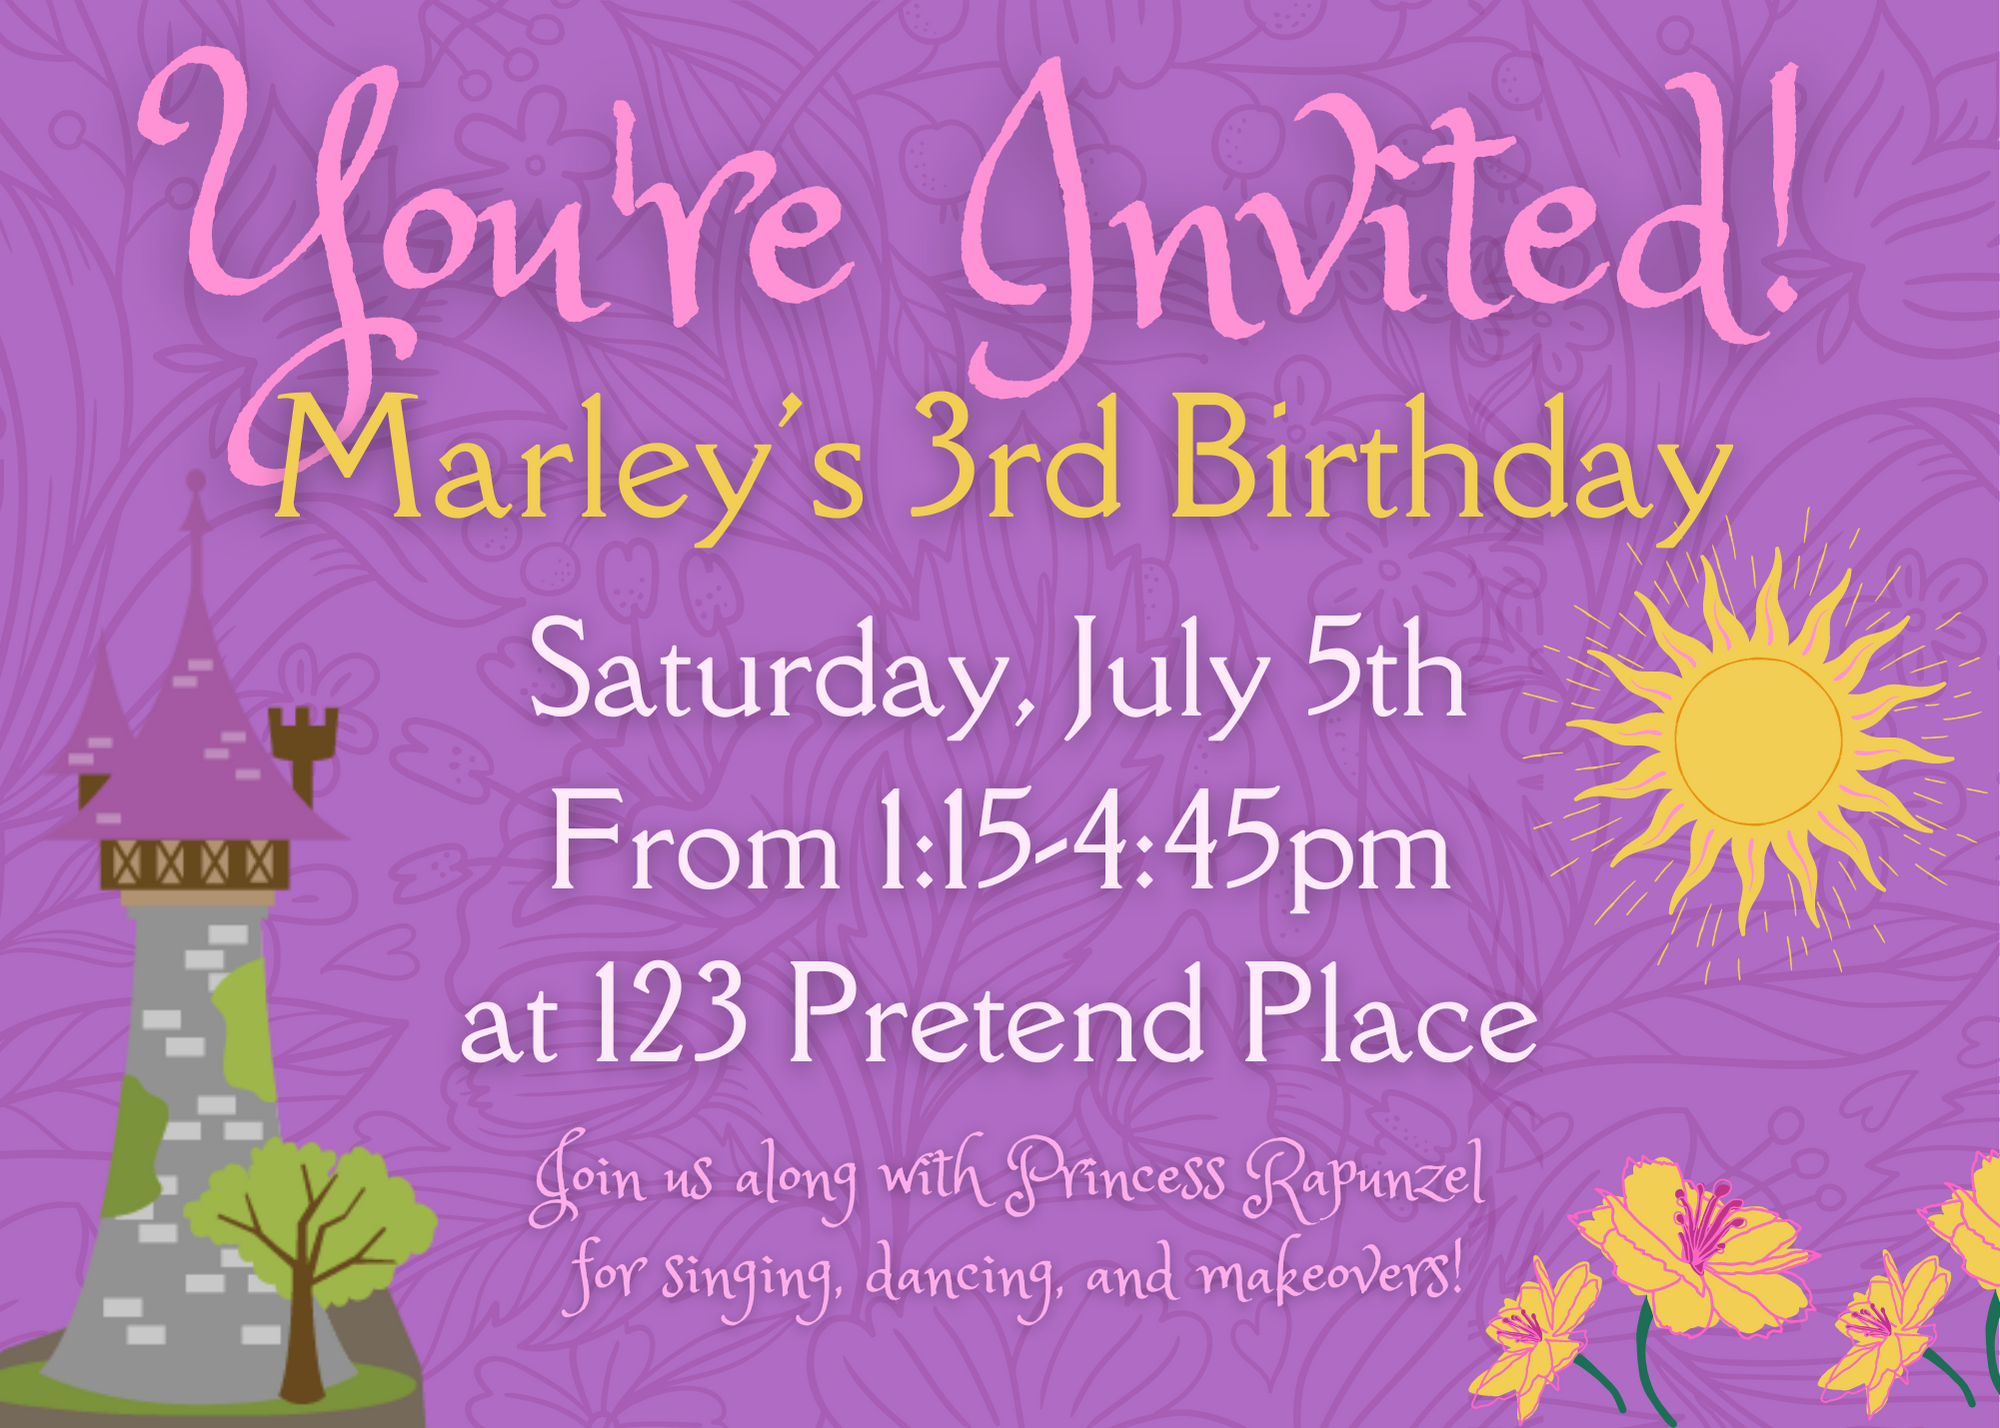 Copy of You're Invited (5).png